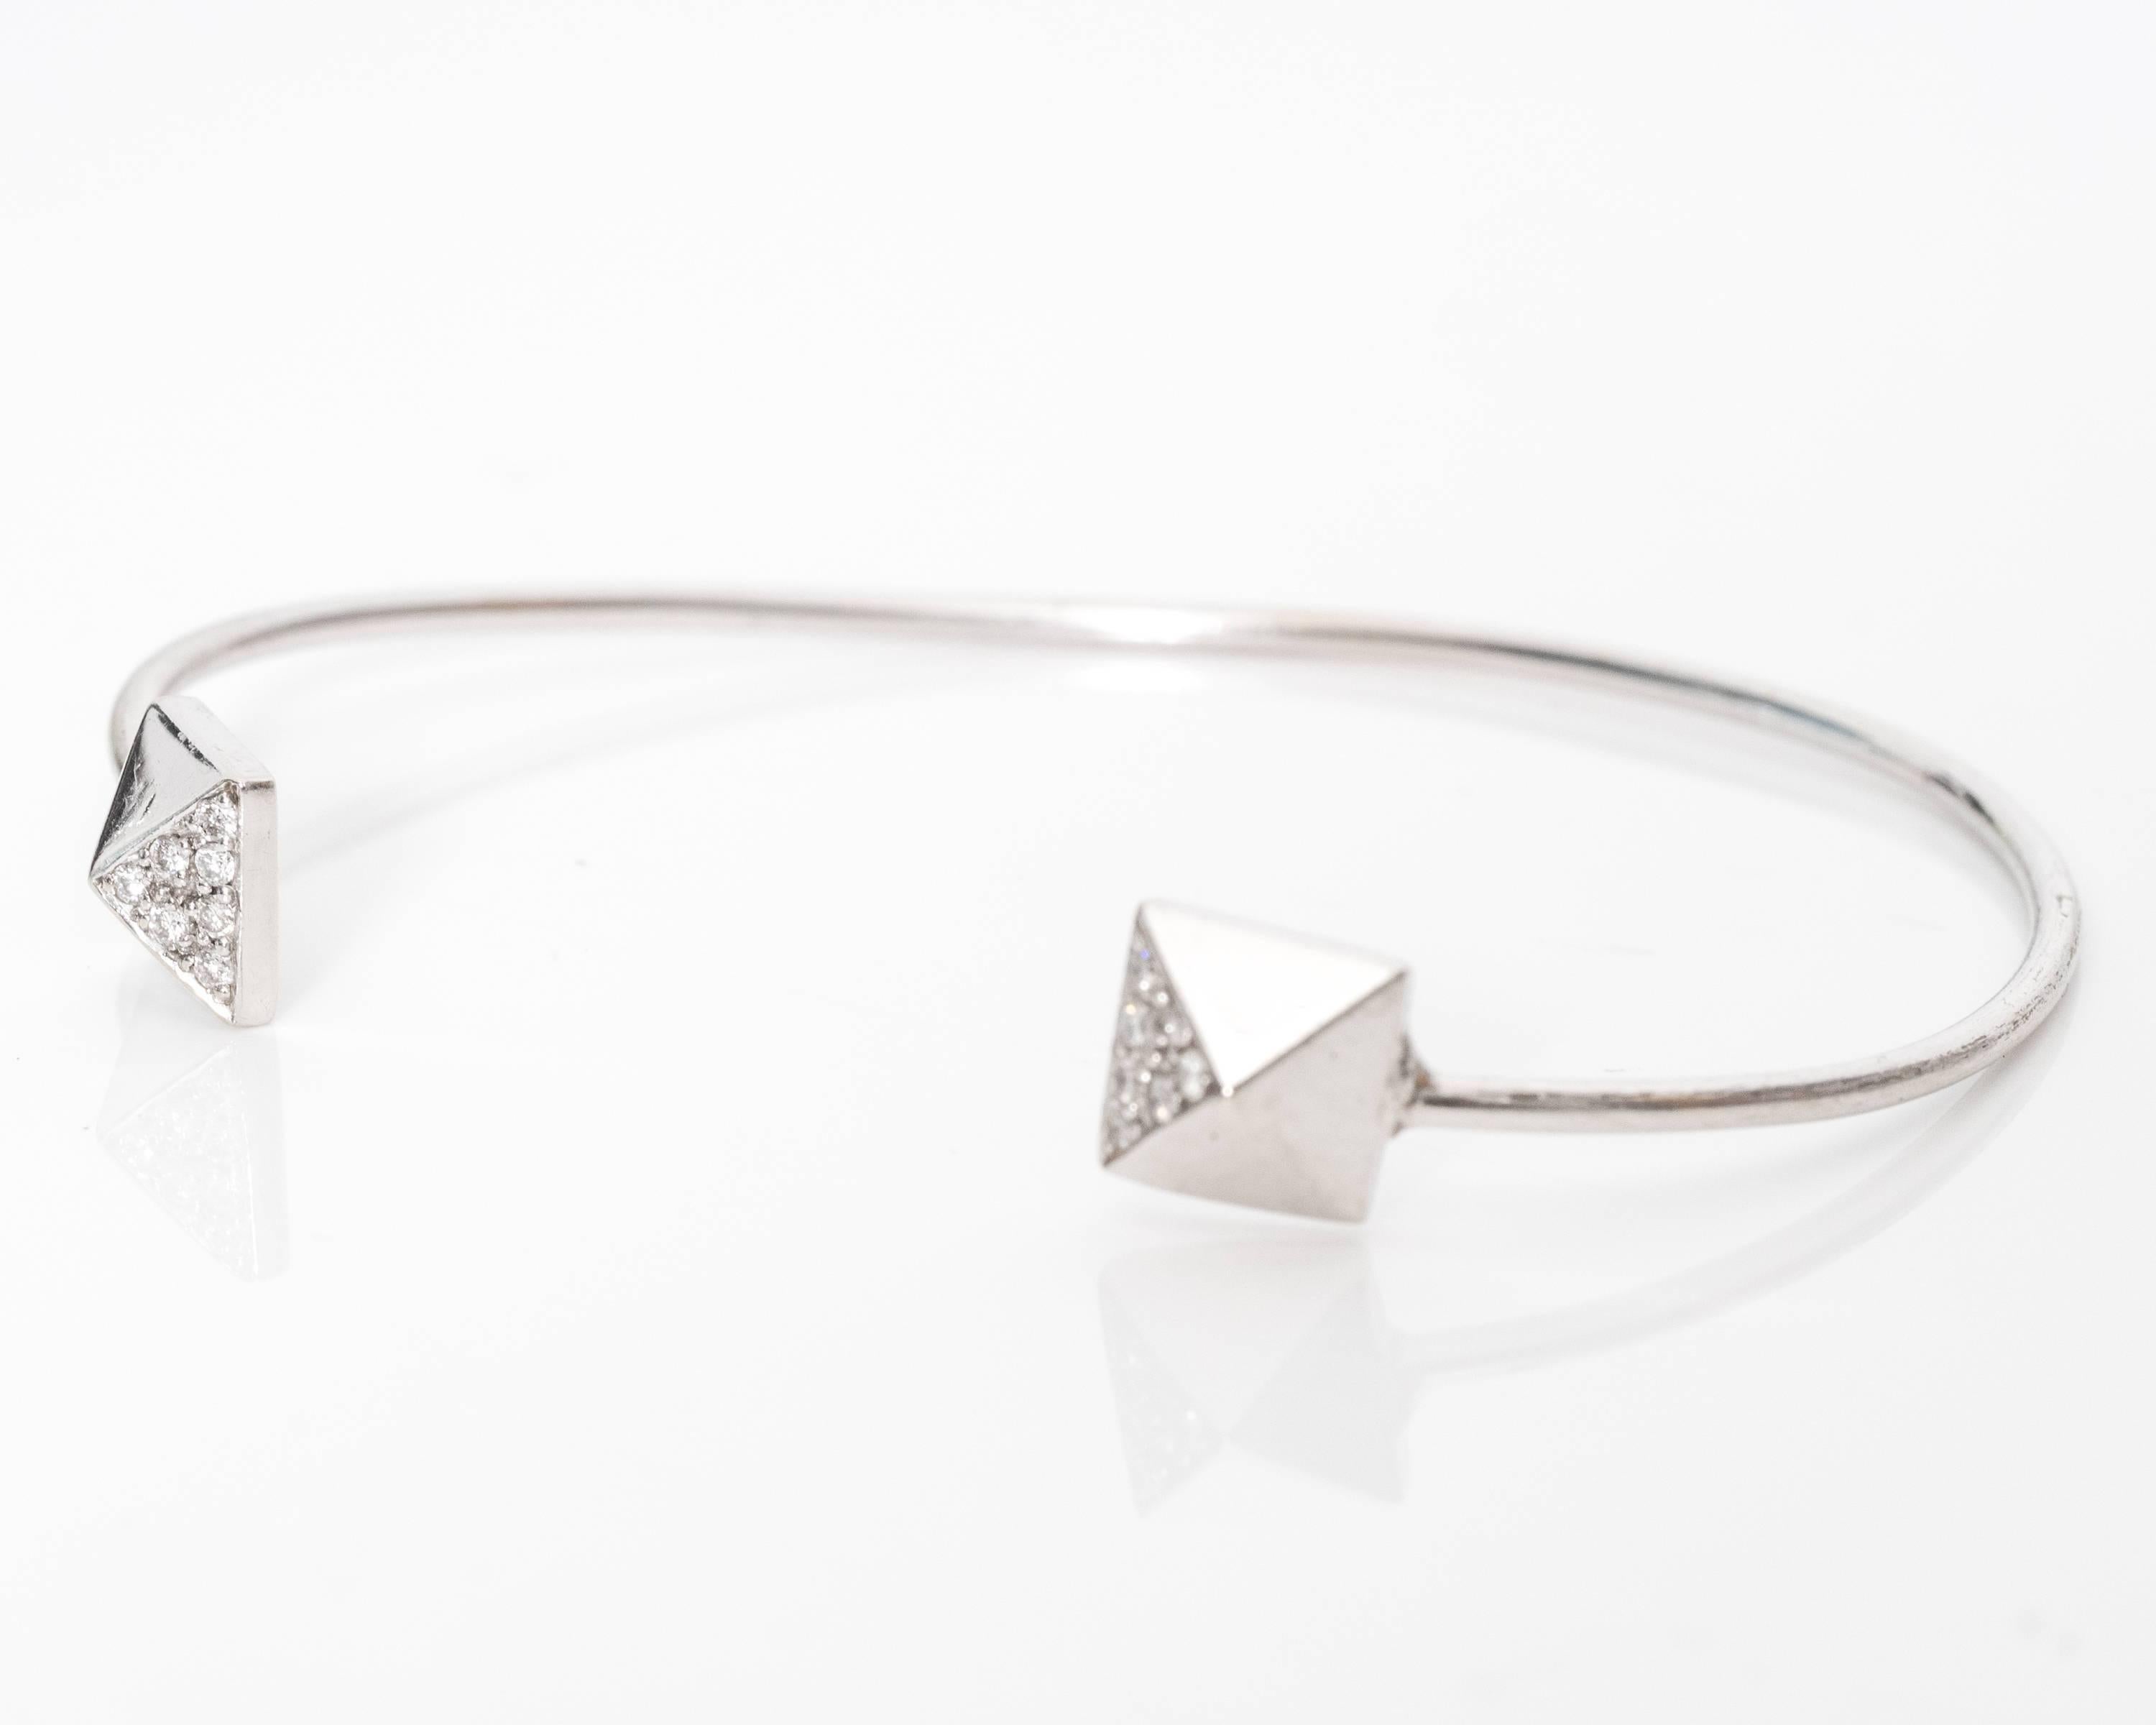 This fabulous bangle bracelet has seven diamonds on each pyramid shaped end accent. The diamonds are set symmetrically along the pyramid shape. The entire bracelet has a shiny white gold hue with a thin frame. It's perfect to wear with other